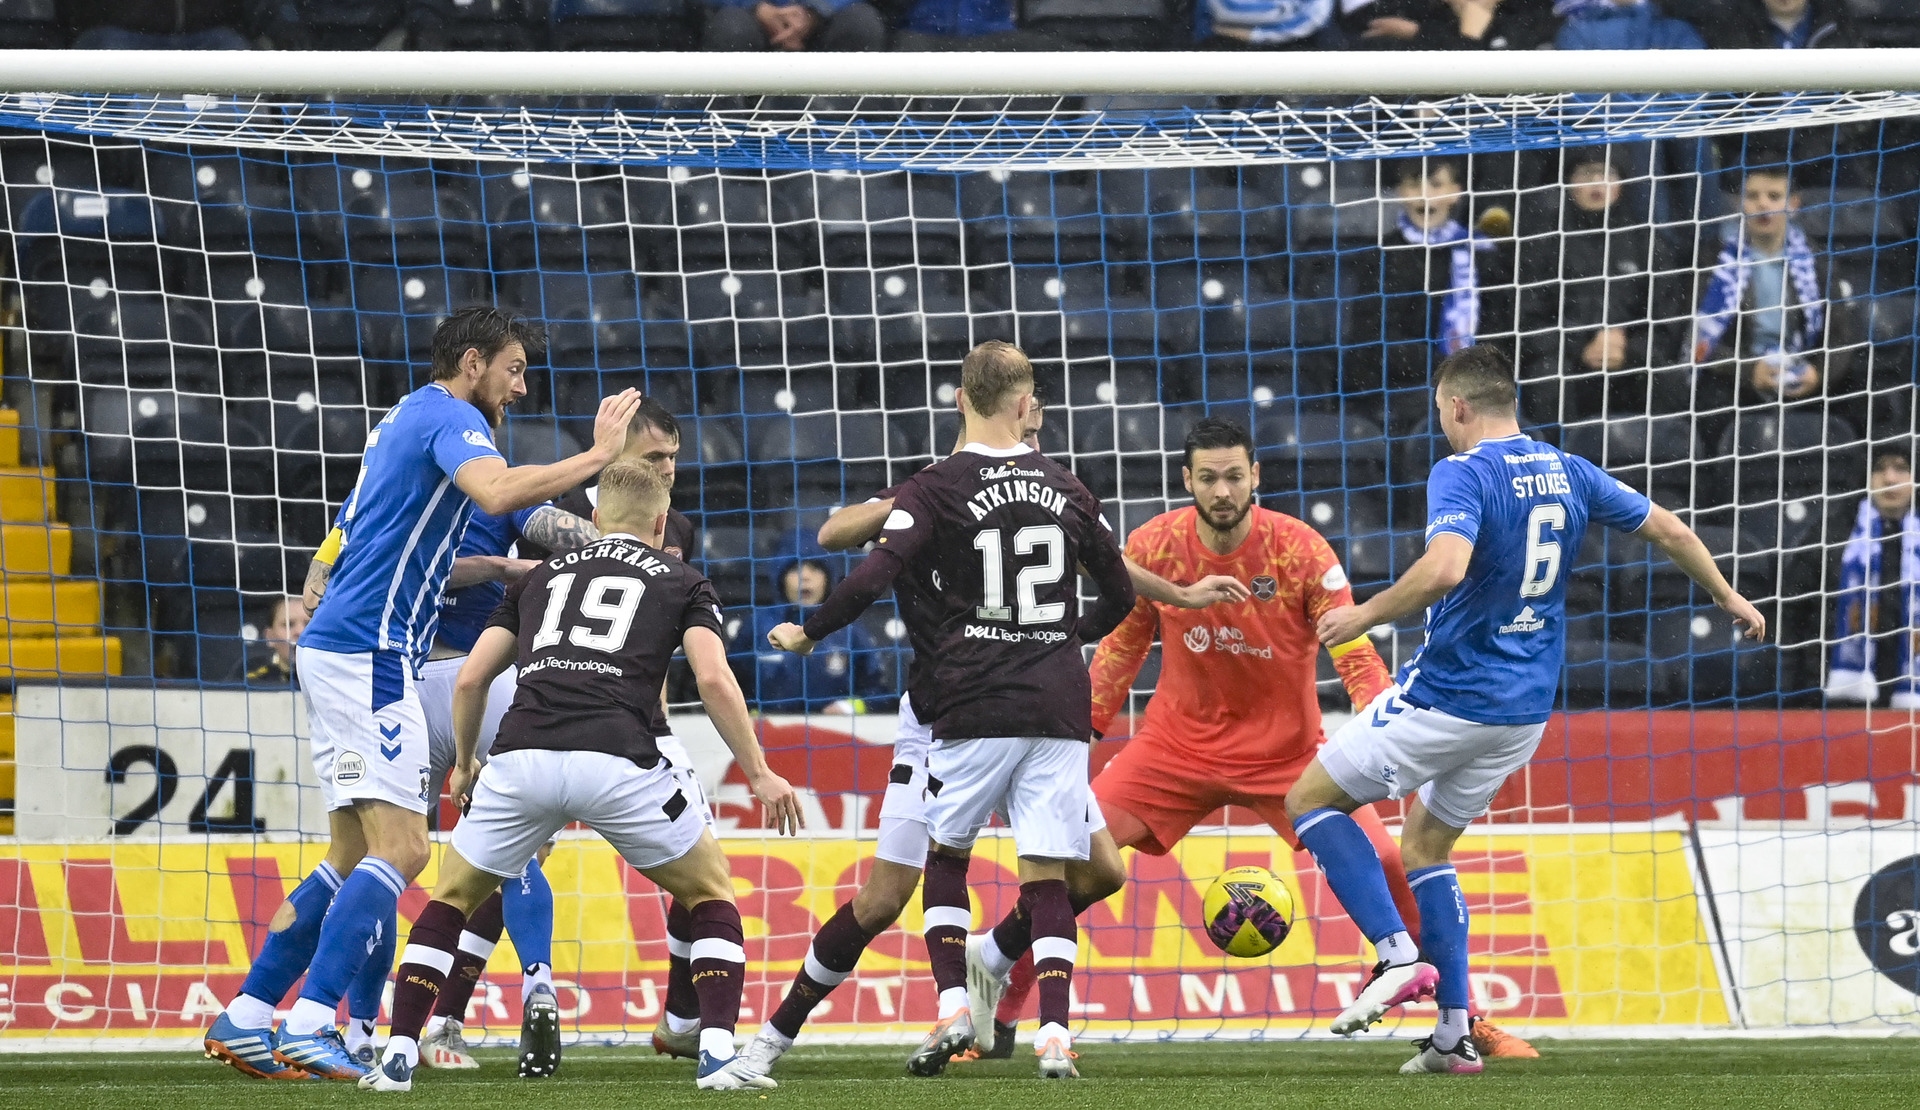 Chris Stokes makes it 1-0 to Kilmarnock at Rugby Park.